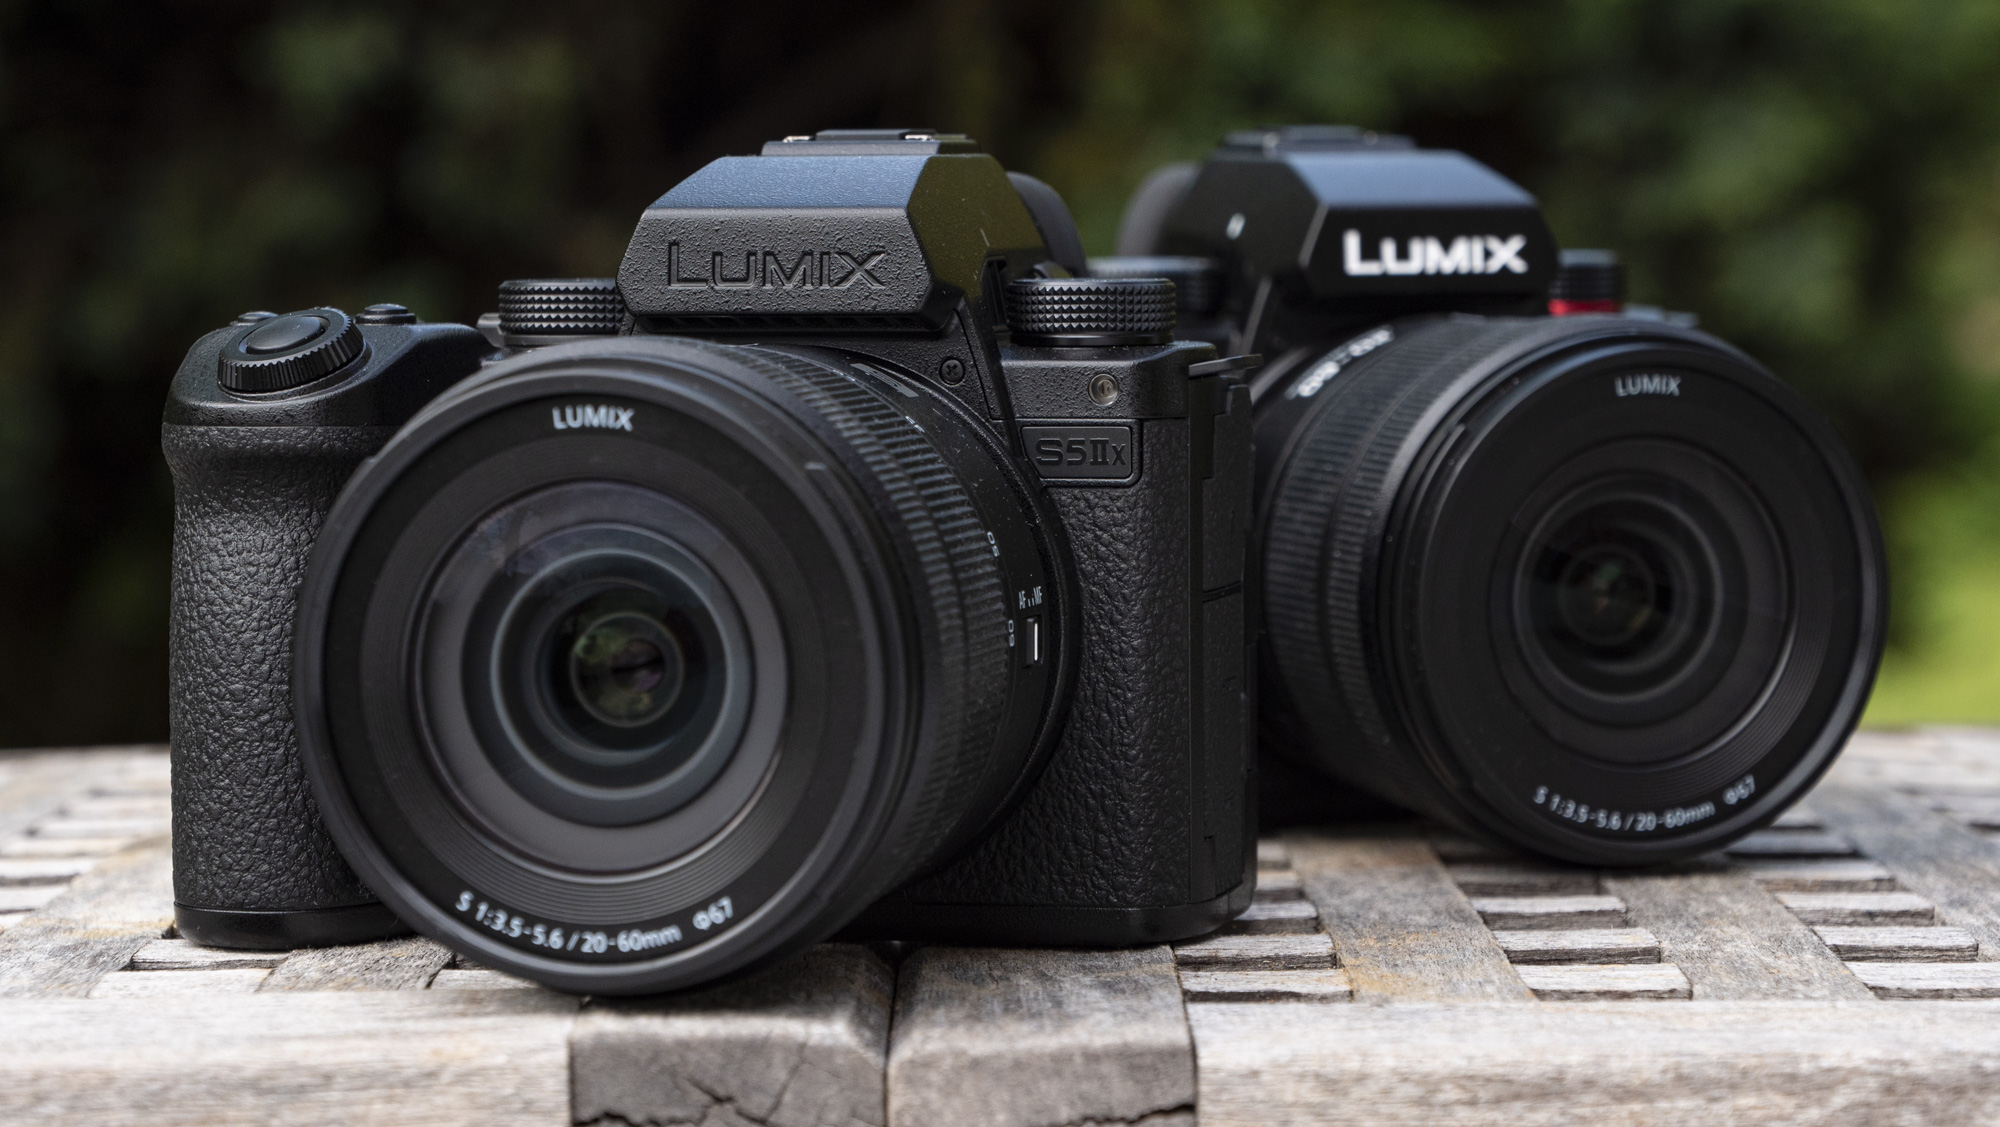 The Panasonic Lumix S5 IIX's video smarts put the Sony A7 IV in the shade